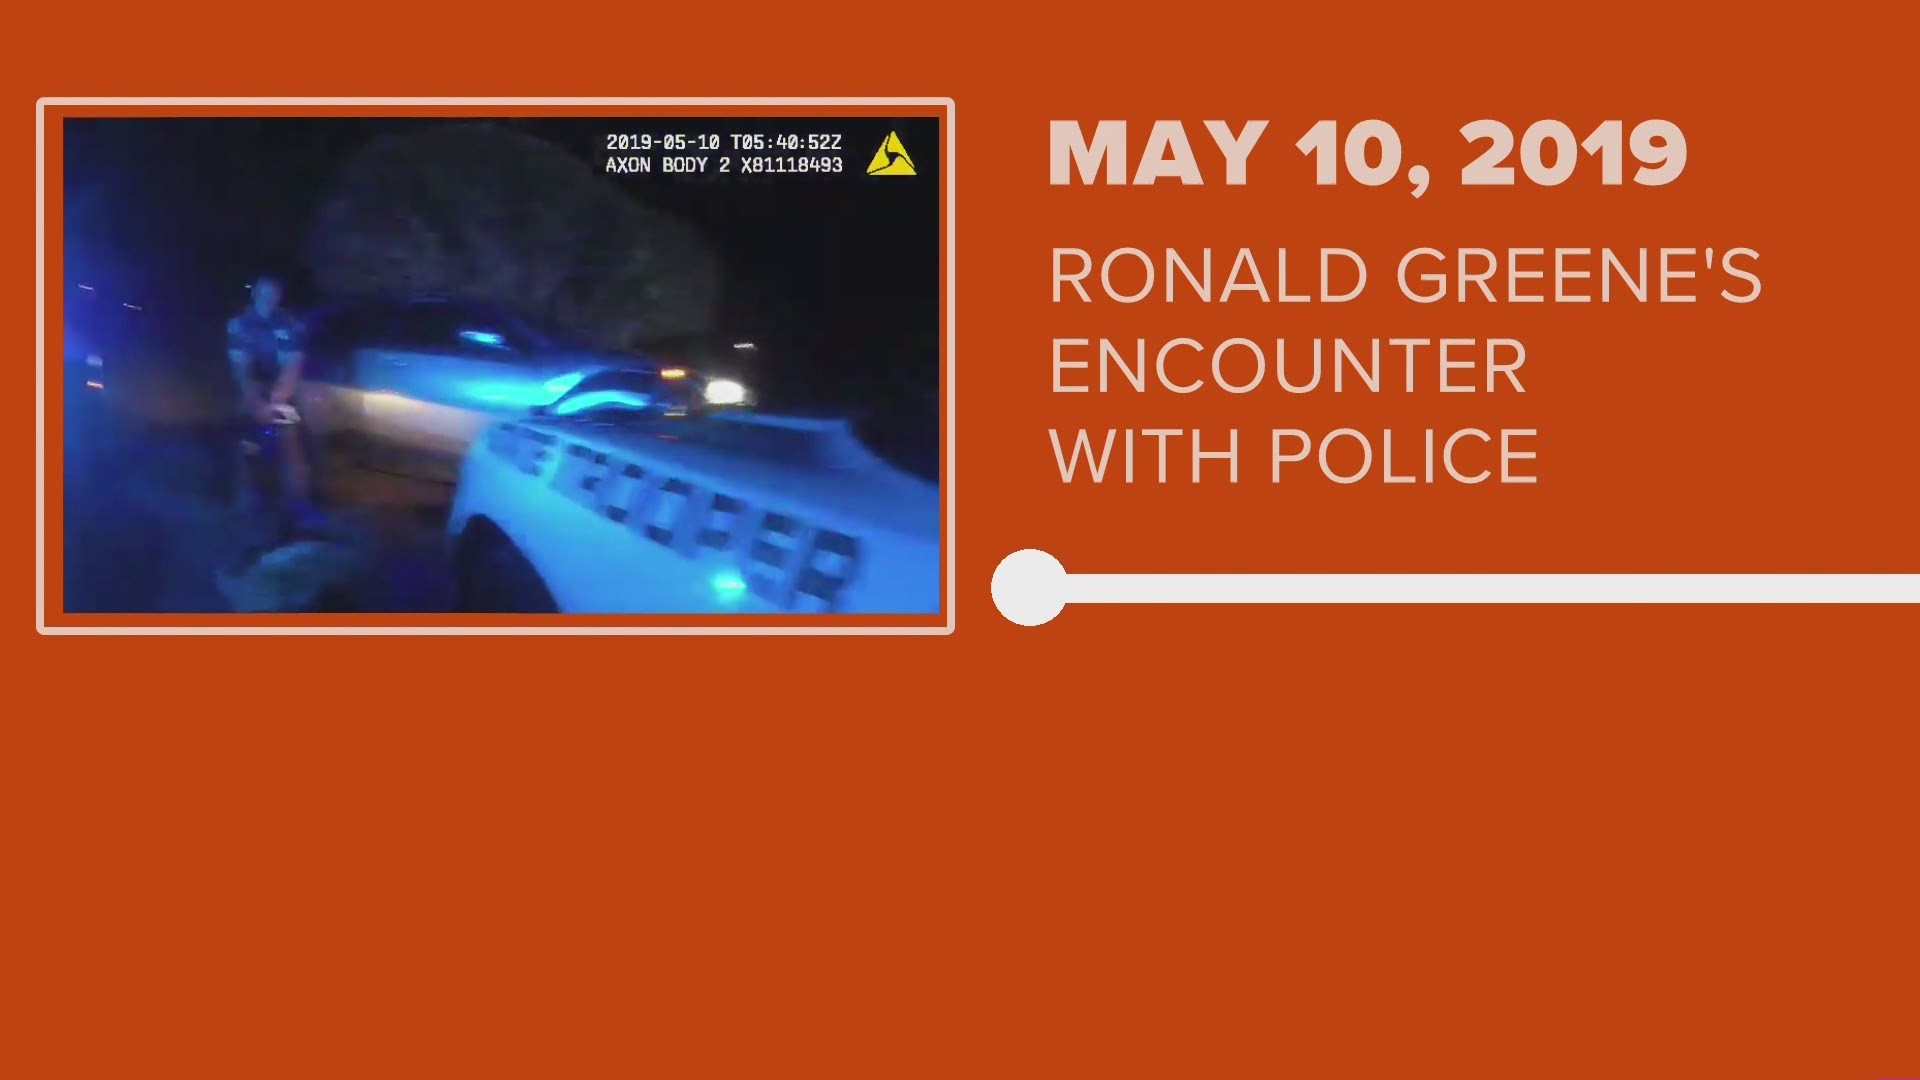 Greene led police on a high-speed chase through Monroe on May 10, 2019. Troopers then got him out of his car, tazed him several times, beat him, and dragged him.